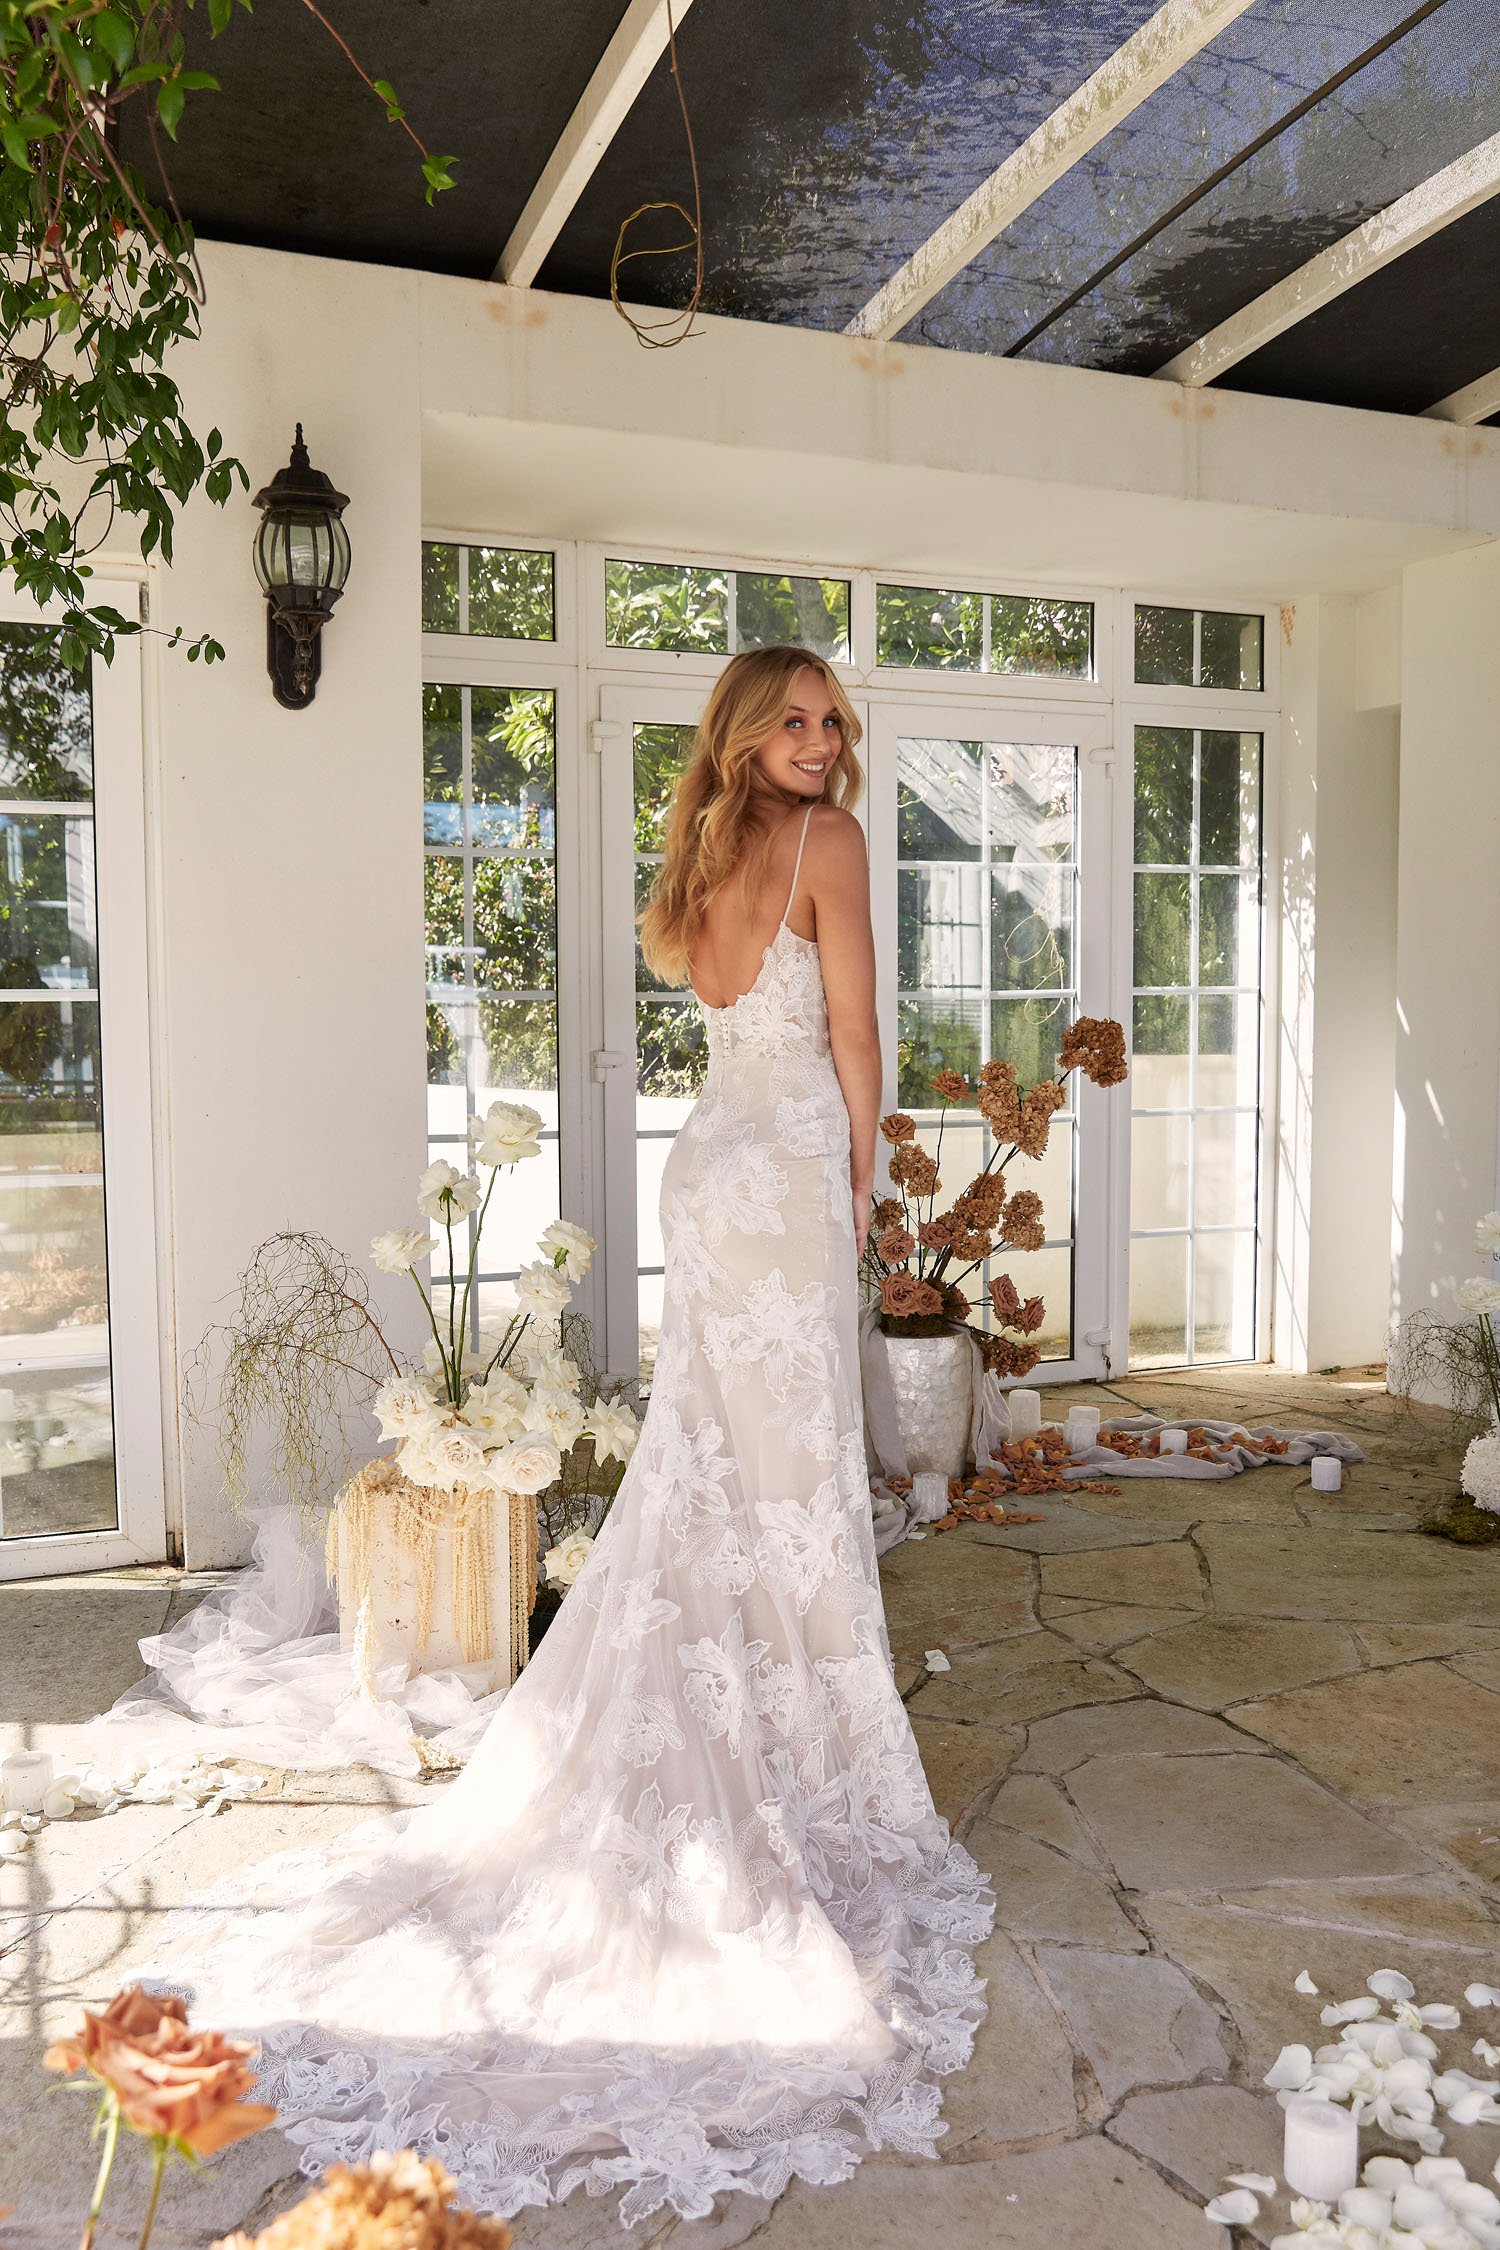 DARIA-ML22222-FULL-LENGTH-FITTED-FLORAL-LACE-GOWN-ILLUSION-BODICE-WITH-LOW-BACK-THIN-STRAPS-PLUNGING-NECKLINE-BUTTON-AND-ZIPPER-CLOSURE-WEDDING-DRESS-MADI-LANE-BRIDAL-2.jpg